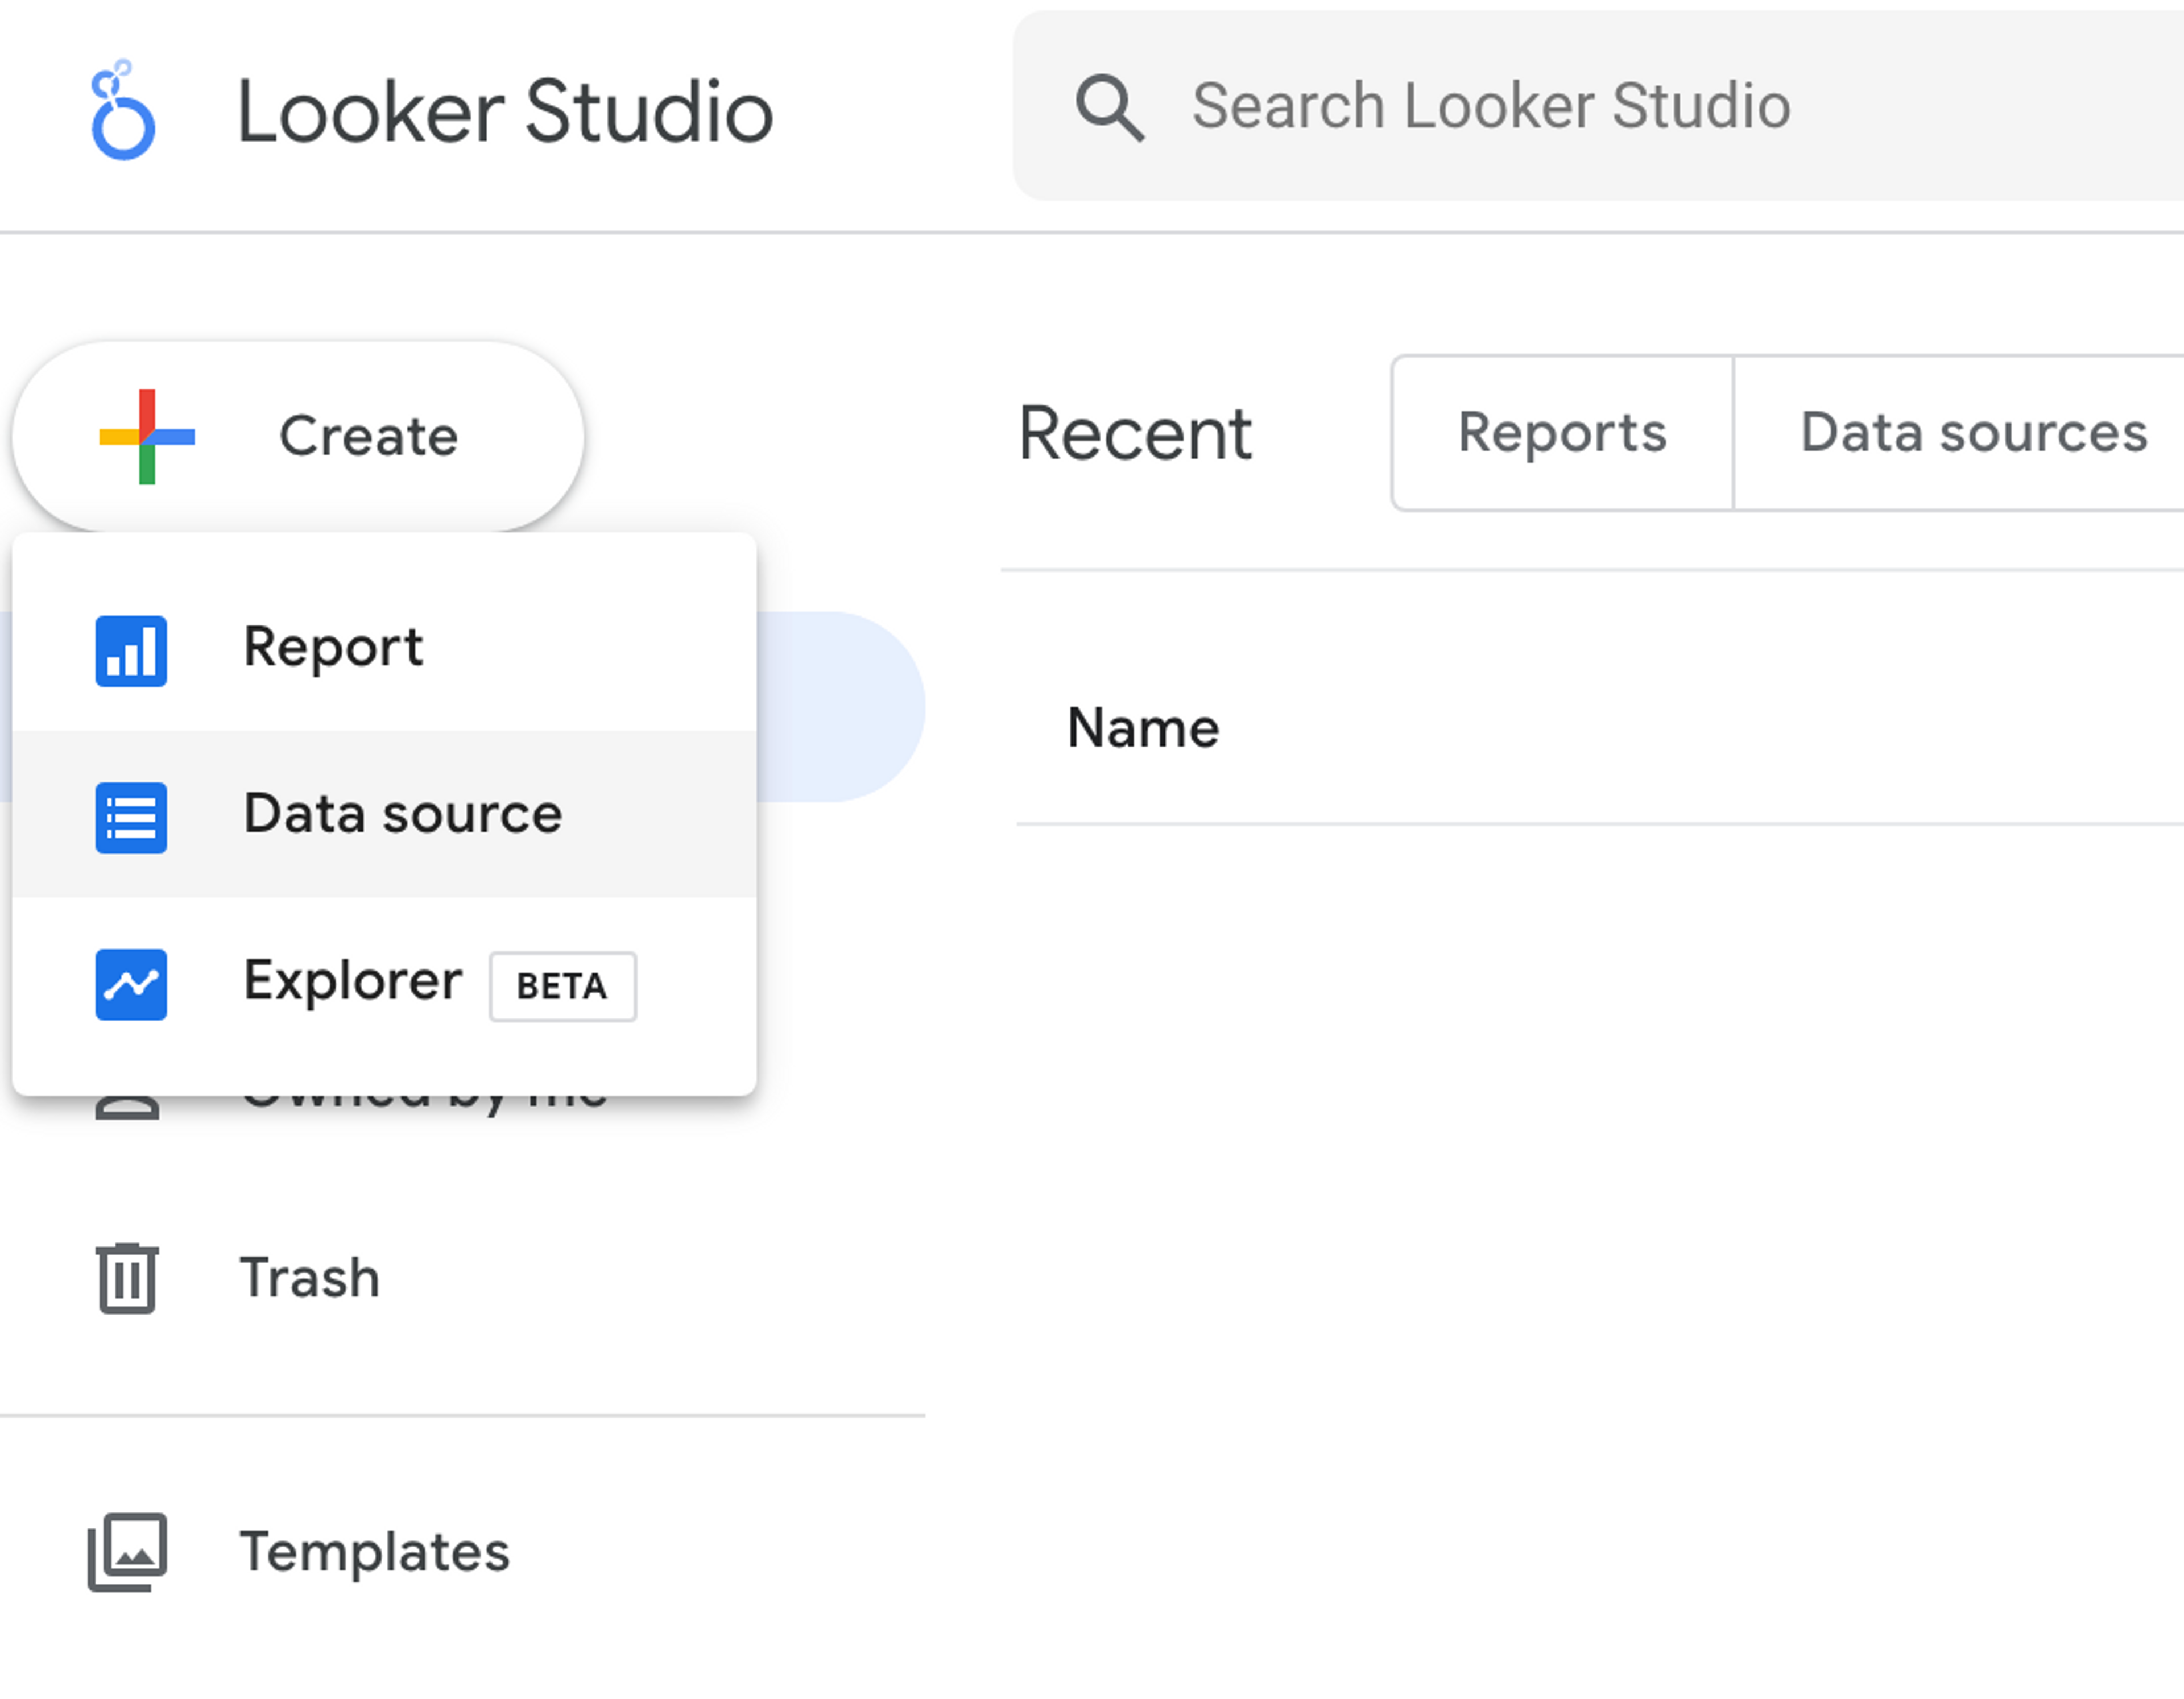 A screenshot of the Looker Studio dashboard. The "Create" button is selected, and a dropdown menu is appearing. The "Data source" dropdown entry is highlighted.